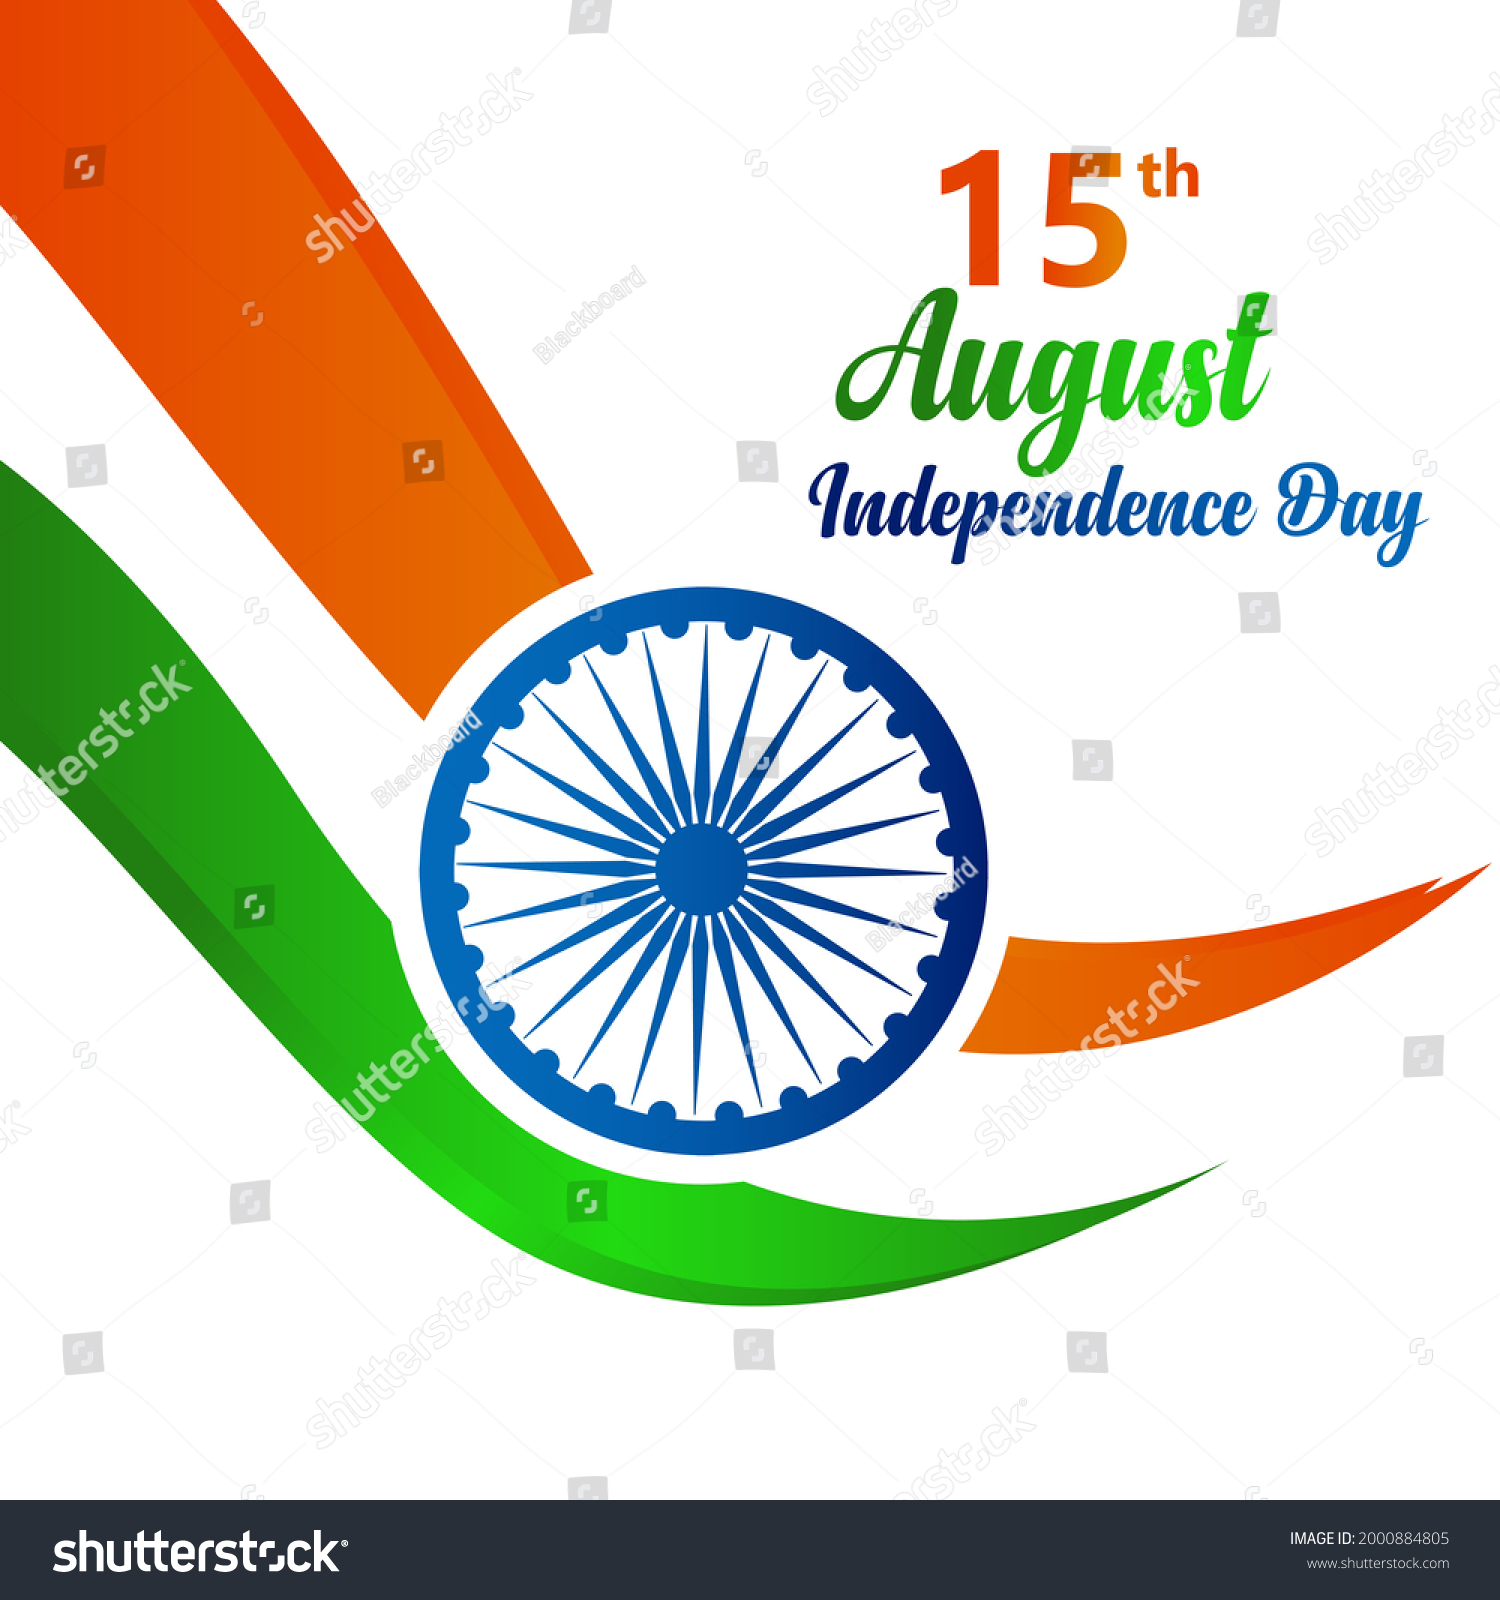 Indian Independence Day Concept Background Ashoka Stock Vector (Royalty ...